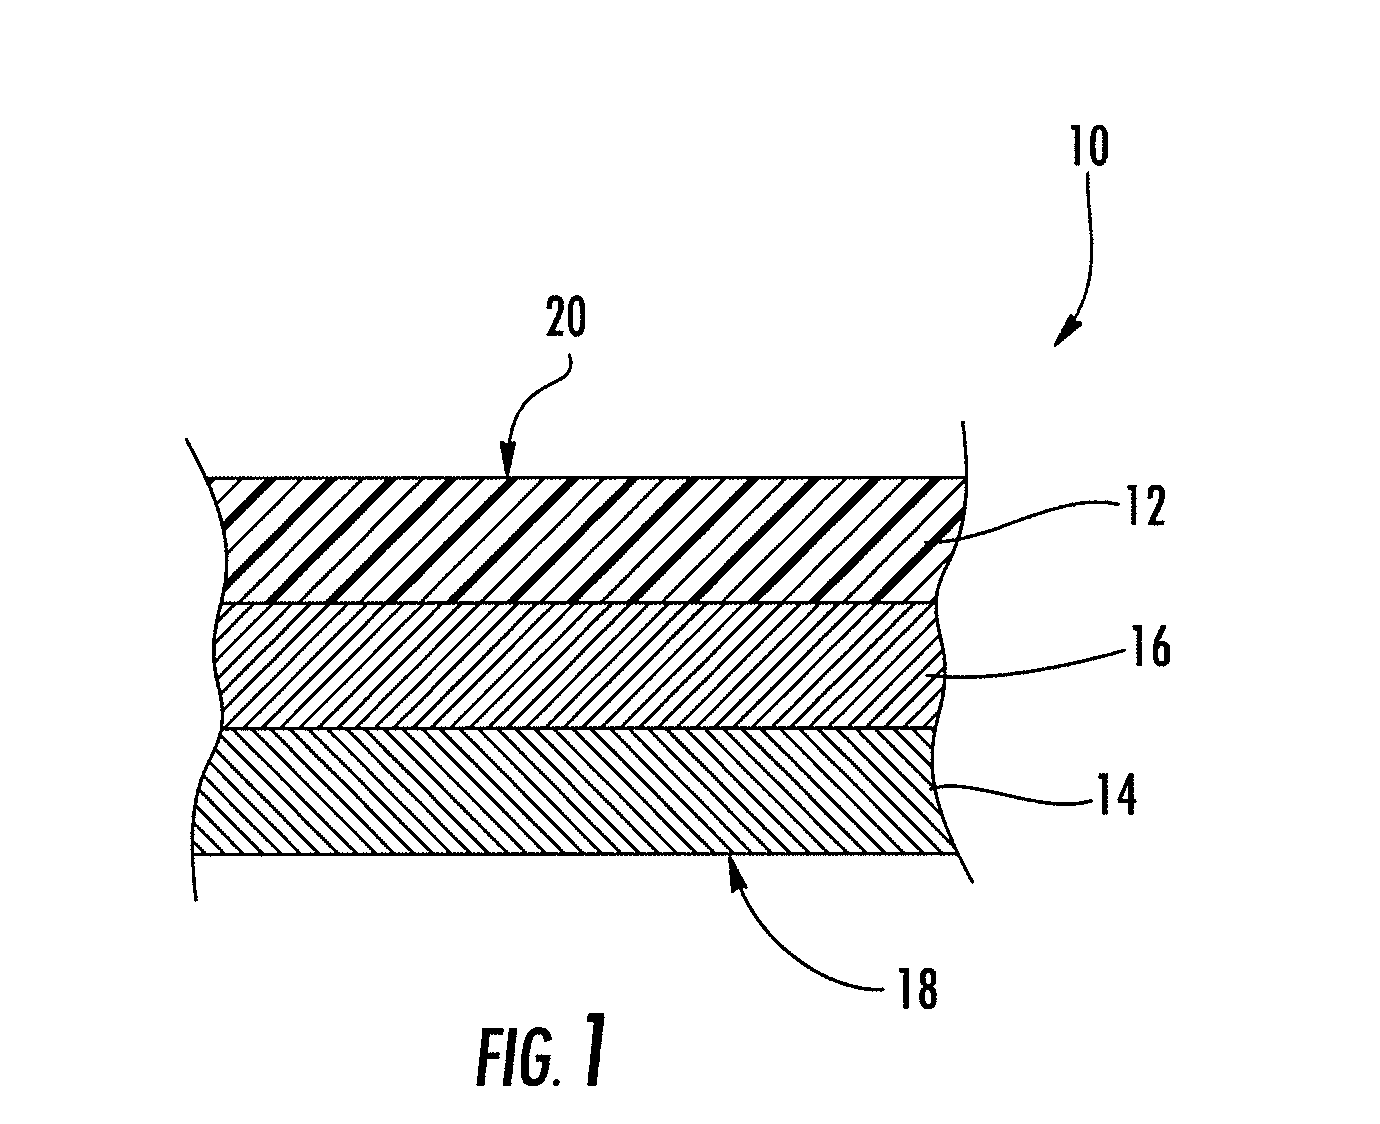 Multilayer Film Having an Active Oxygen Barrier Layer With Radiation Enhanced Active Barrier Properties